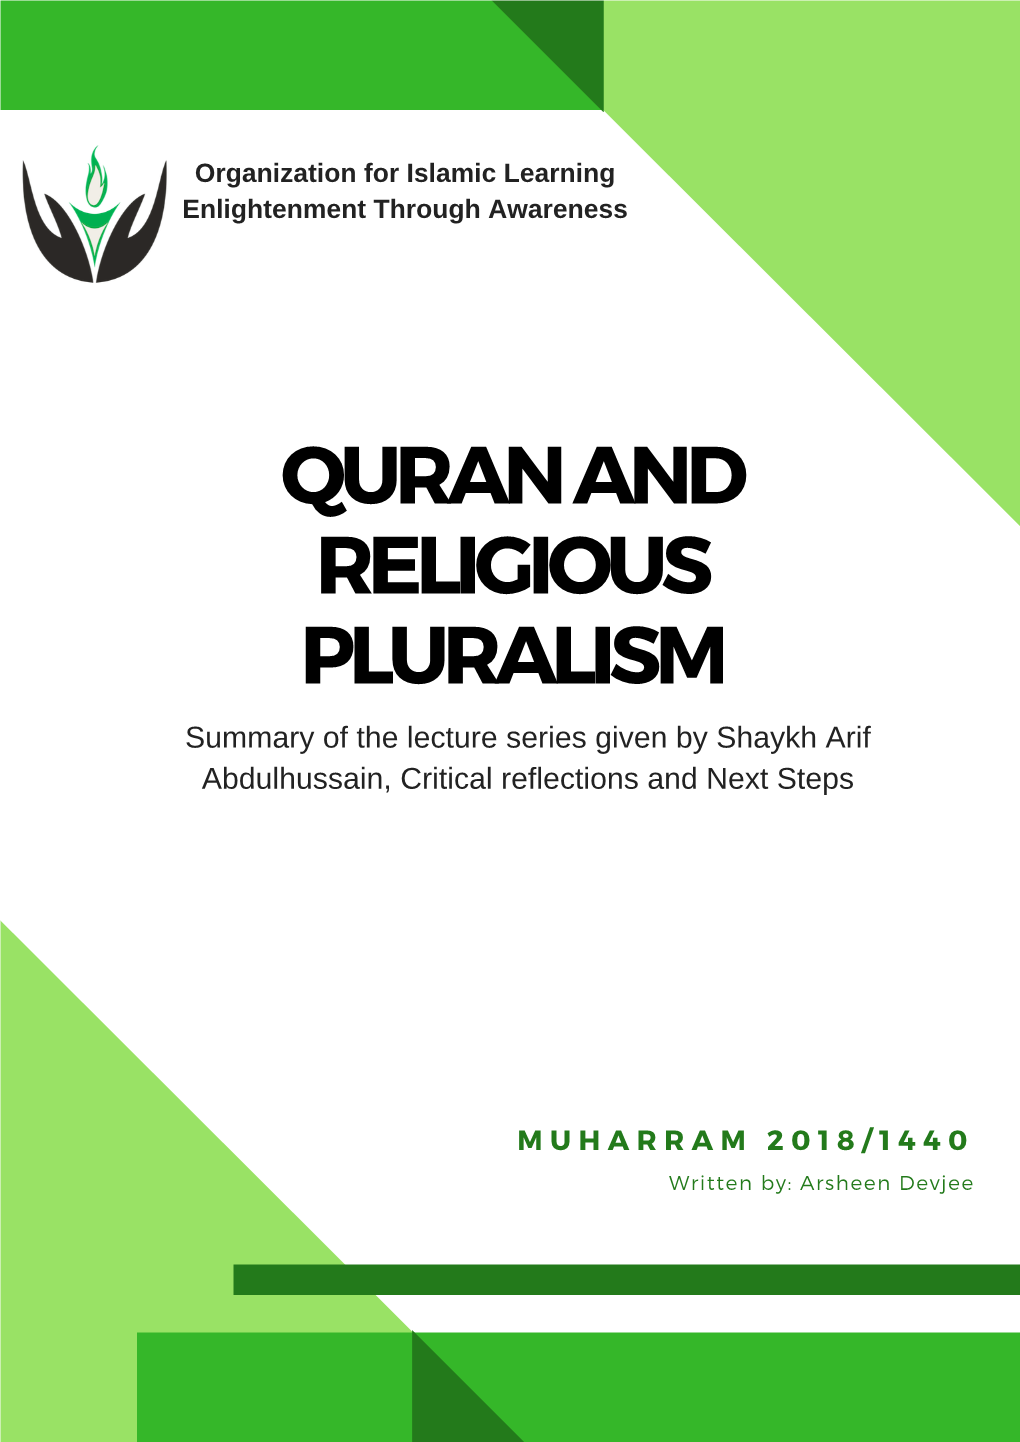 QURAN and RELIGIOUS PLURALISM Summary of the Lecture S Eries Given by Shaykh Arif Abdulhussain, Critical Reflections and Next Steps